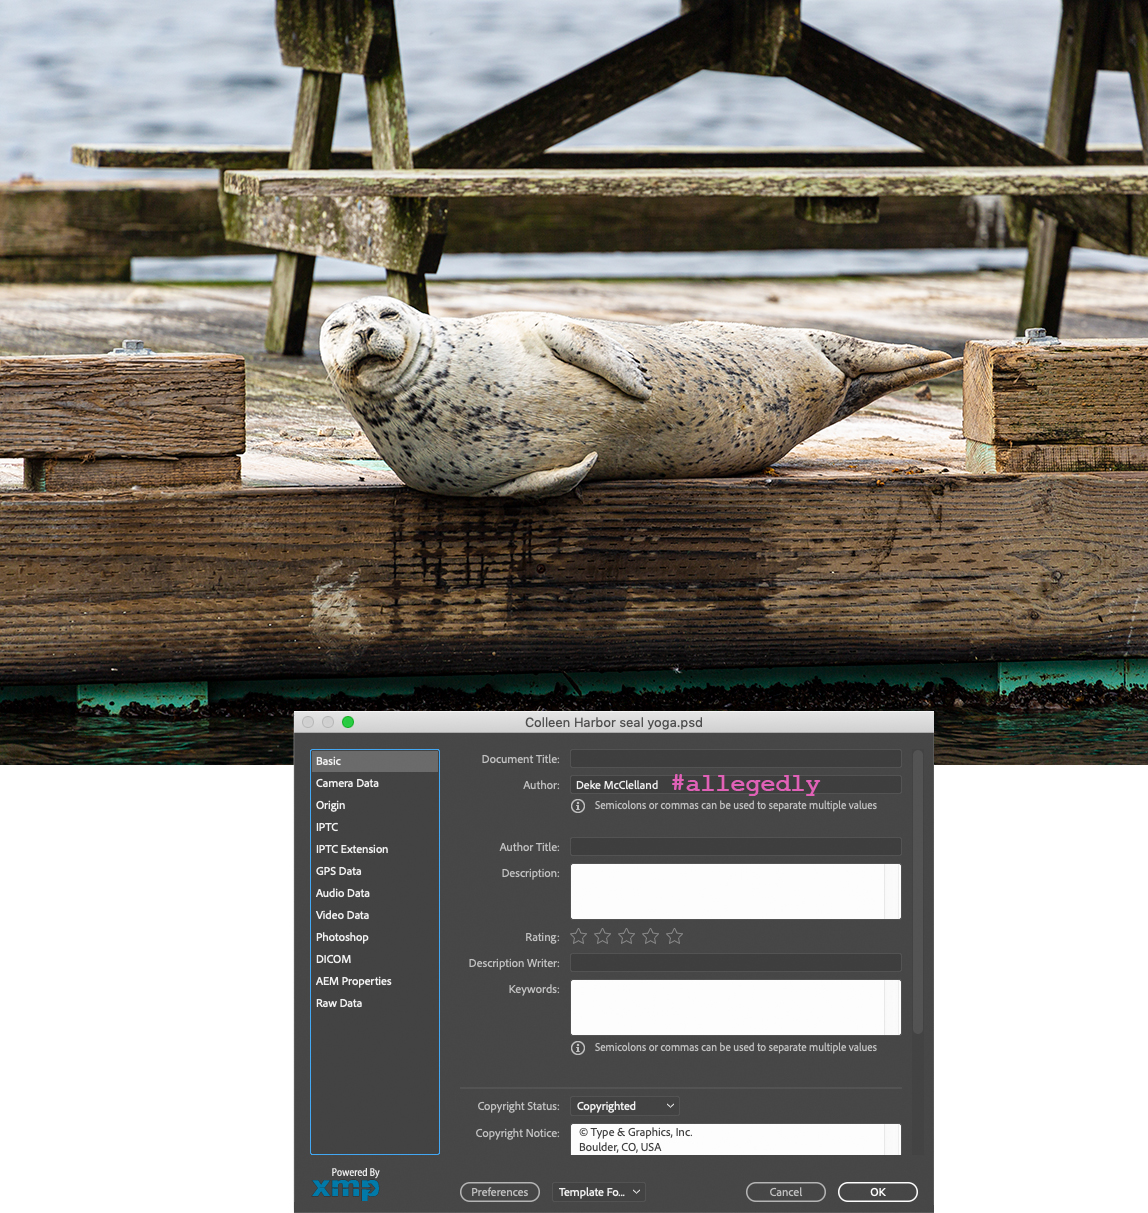 A photo of a harbor seal with the File Info dialog box and a snarky hashtag